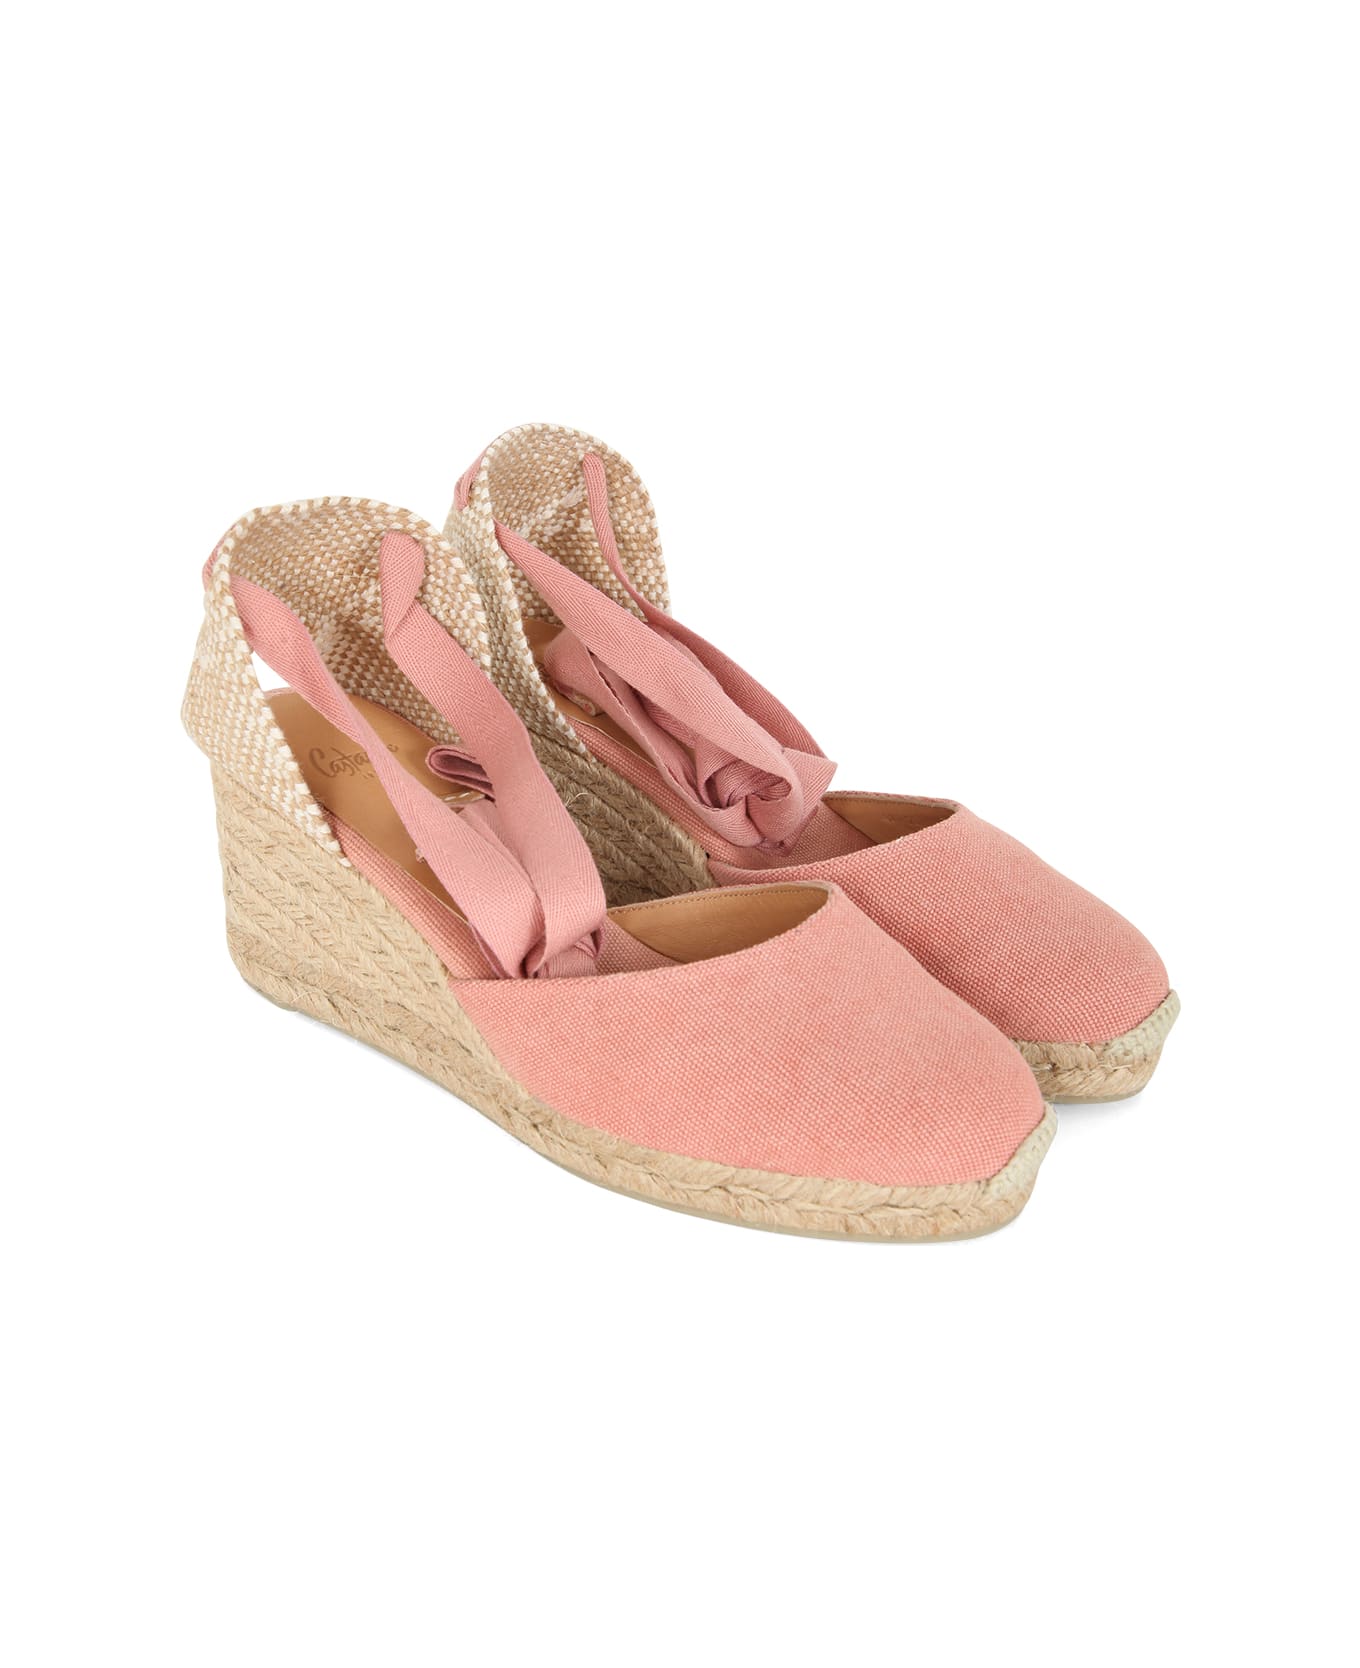 Castañer Carina Espadrilles Wedge Sandal With Ankle Laces - Pink ウェッジシューズ